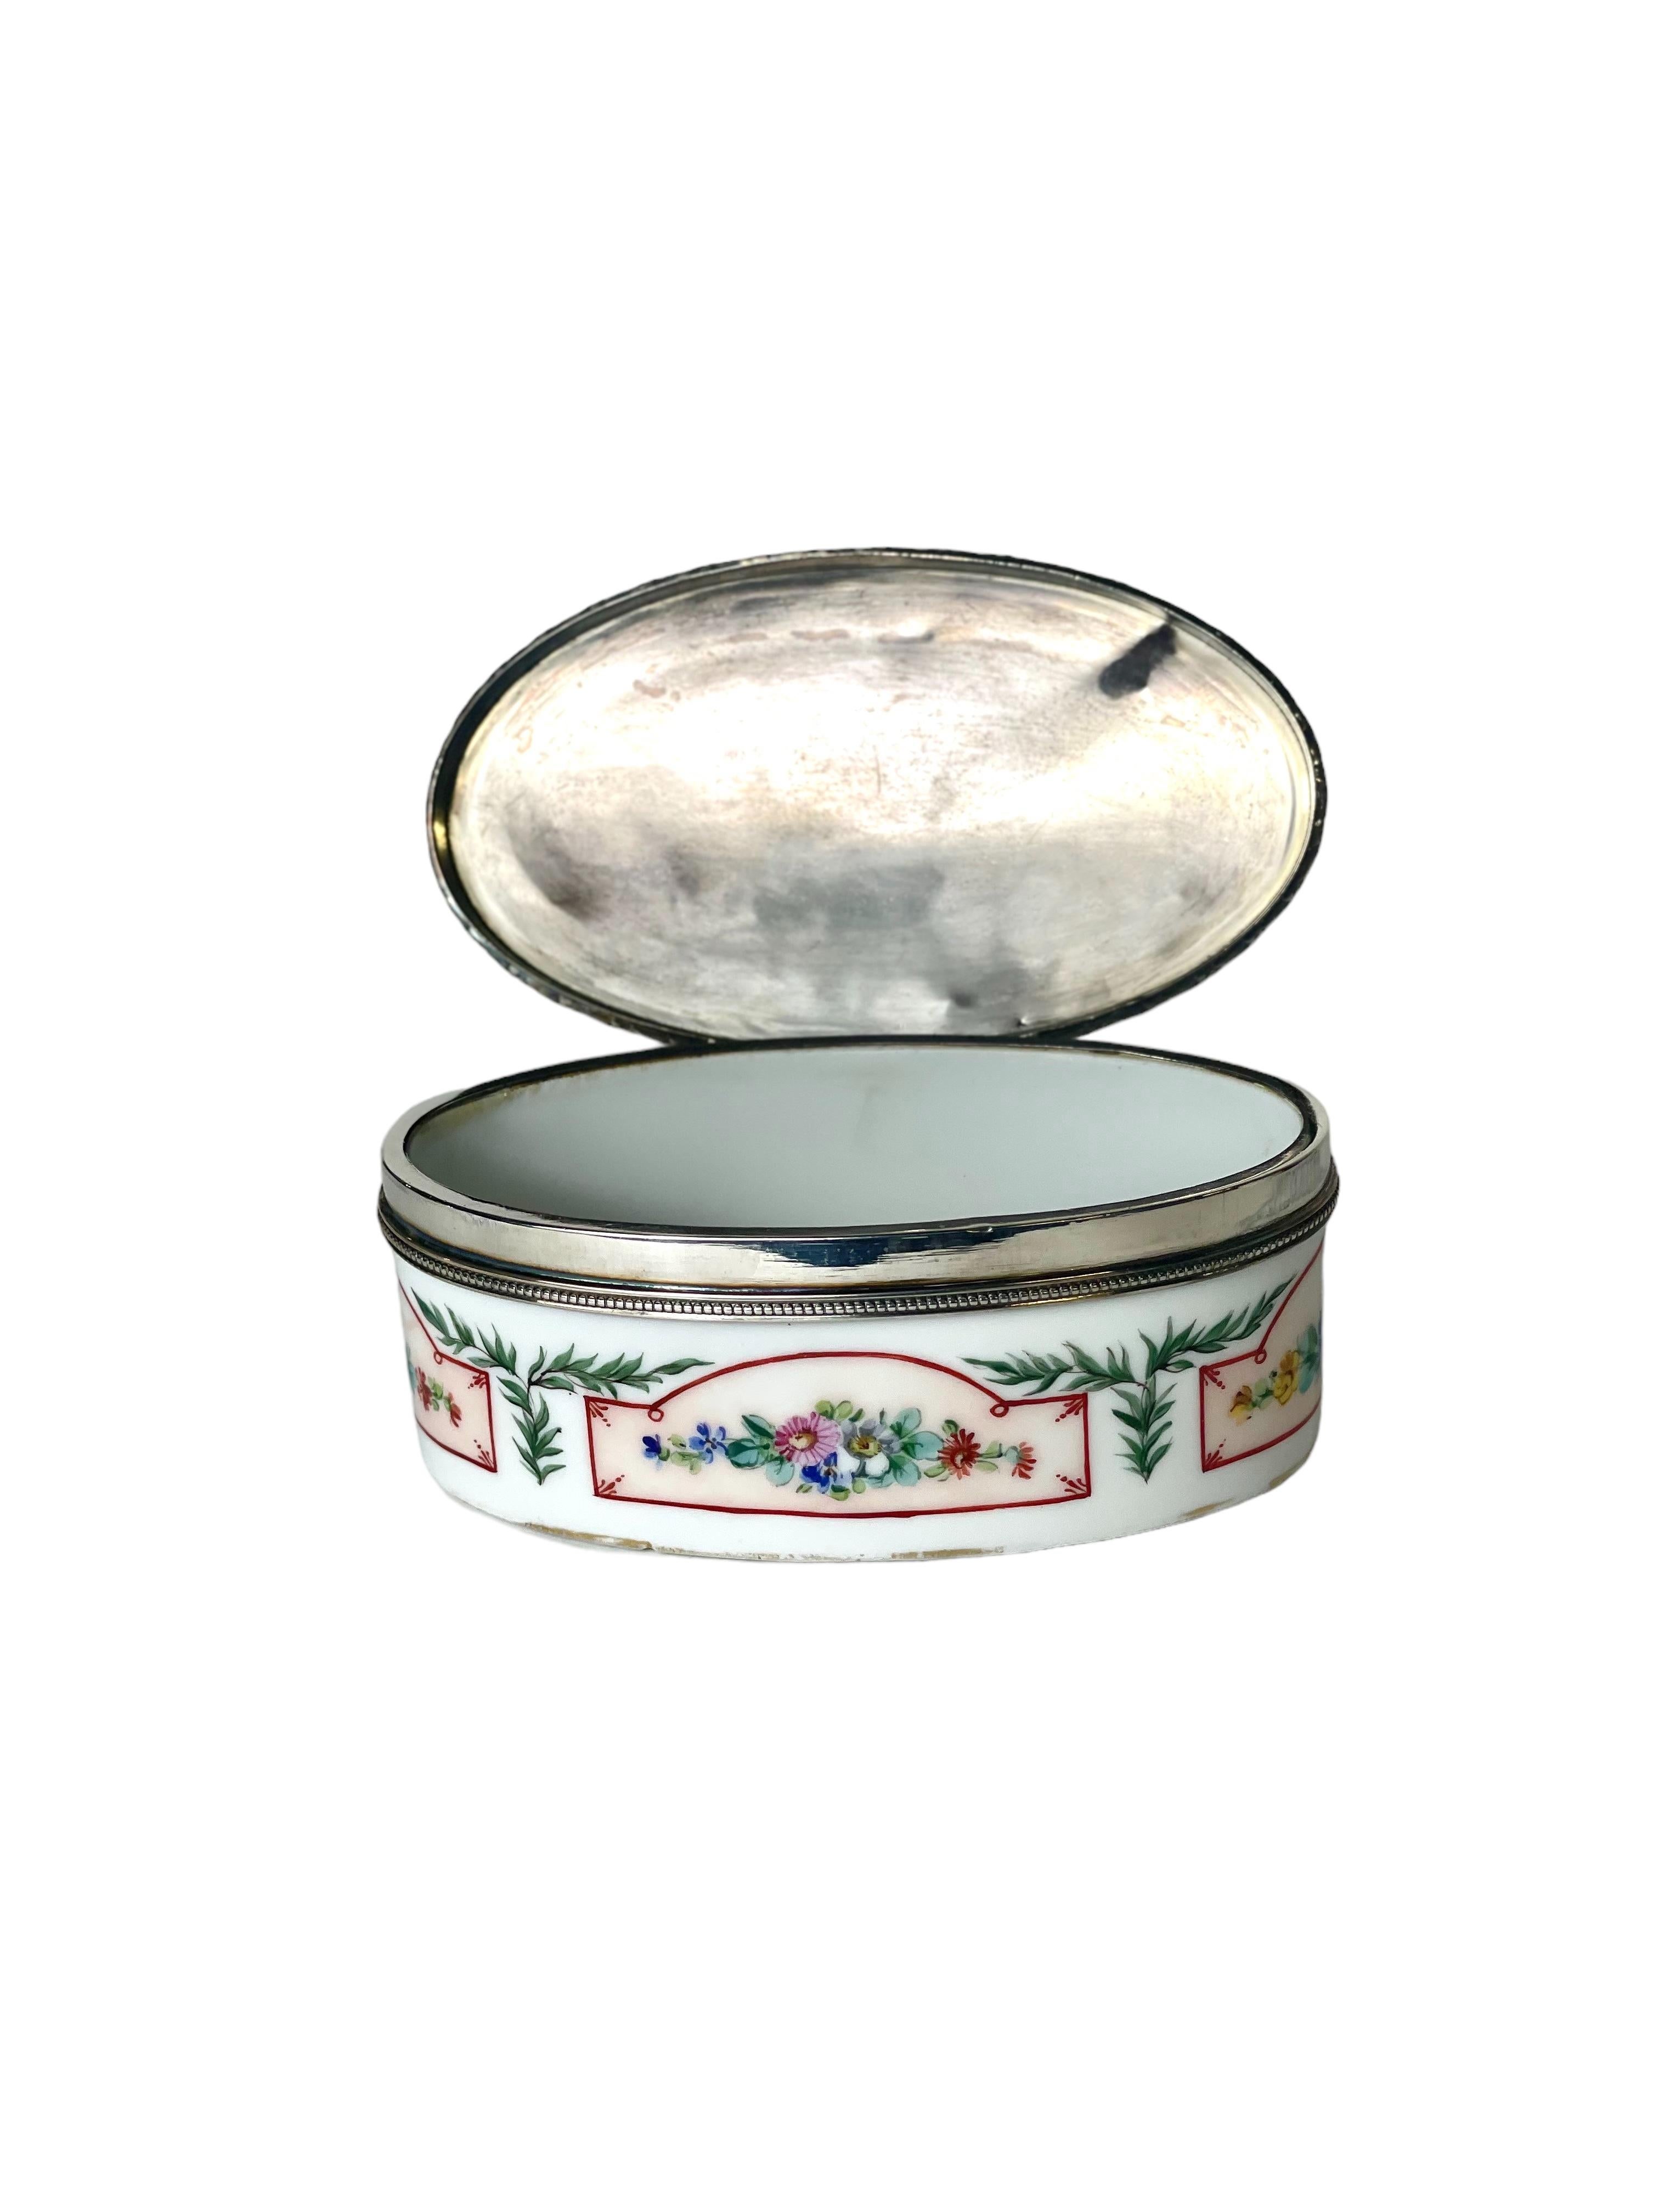 A charming little sterling silver-lidded porcelain box, possibly used for snoring snuff, or for general trinkets. The silver top is decorated in Louis XVI style, and bears the Minerva head silver hallmark, as well as the mark of the French